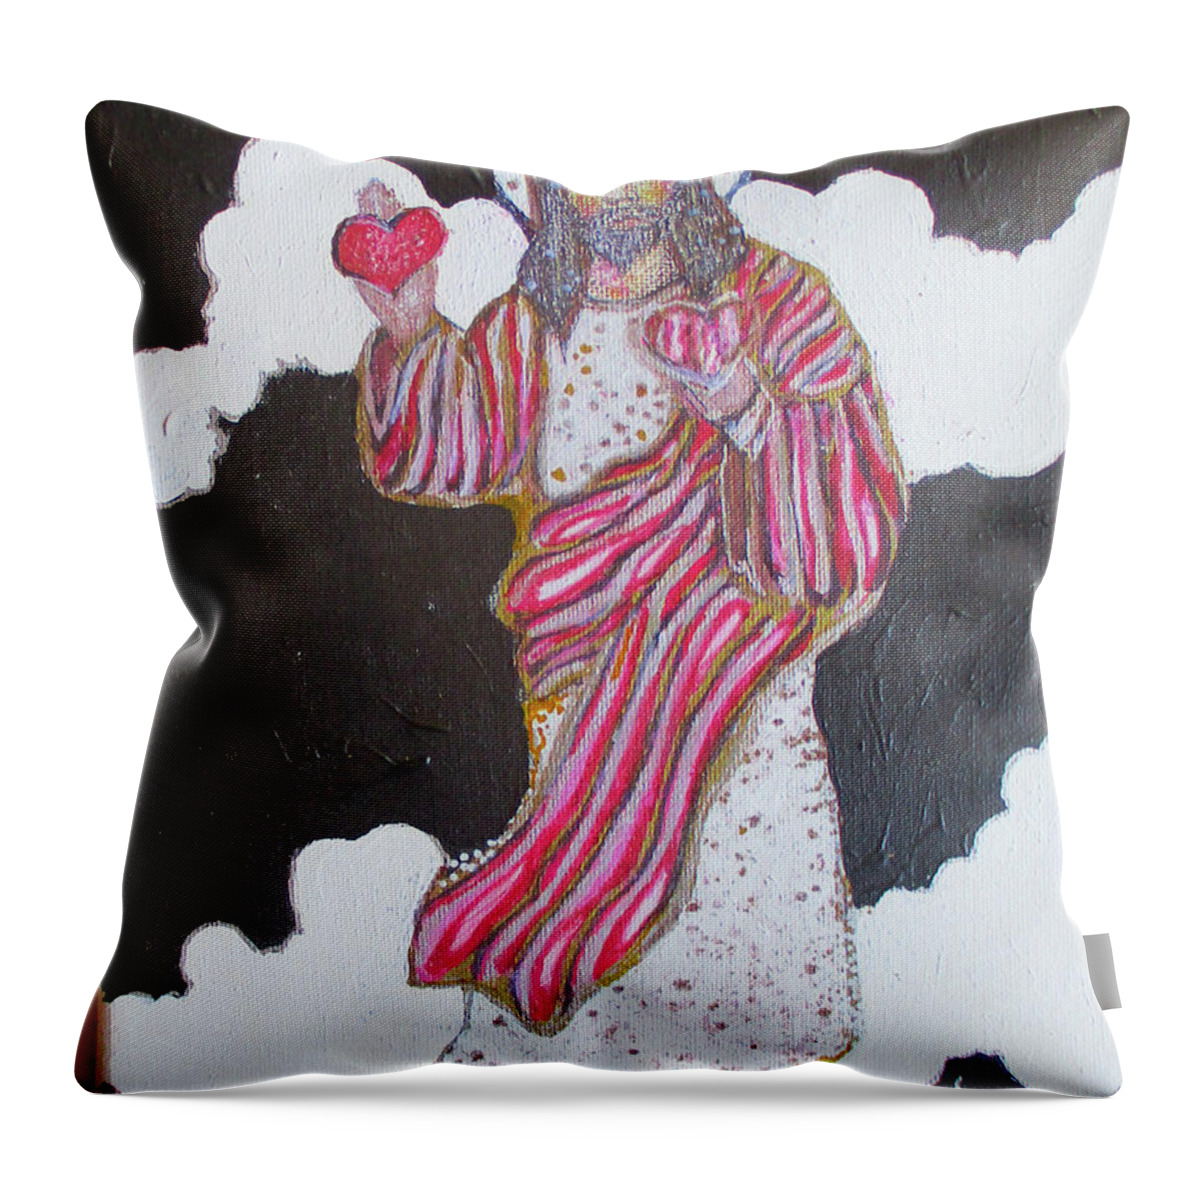 Love Throw Pillow featuring the painting Jesus #1 by Dede Shamel Davalos